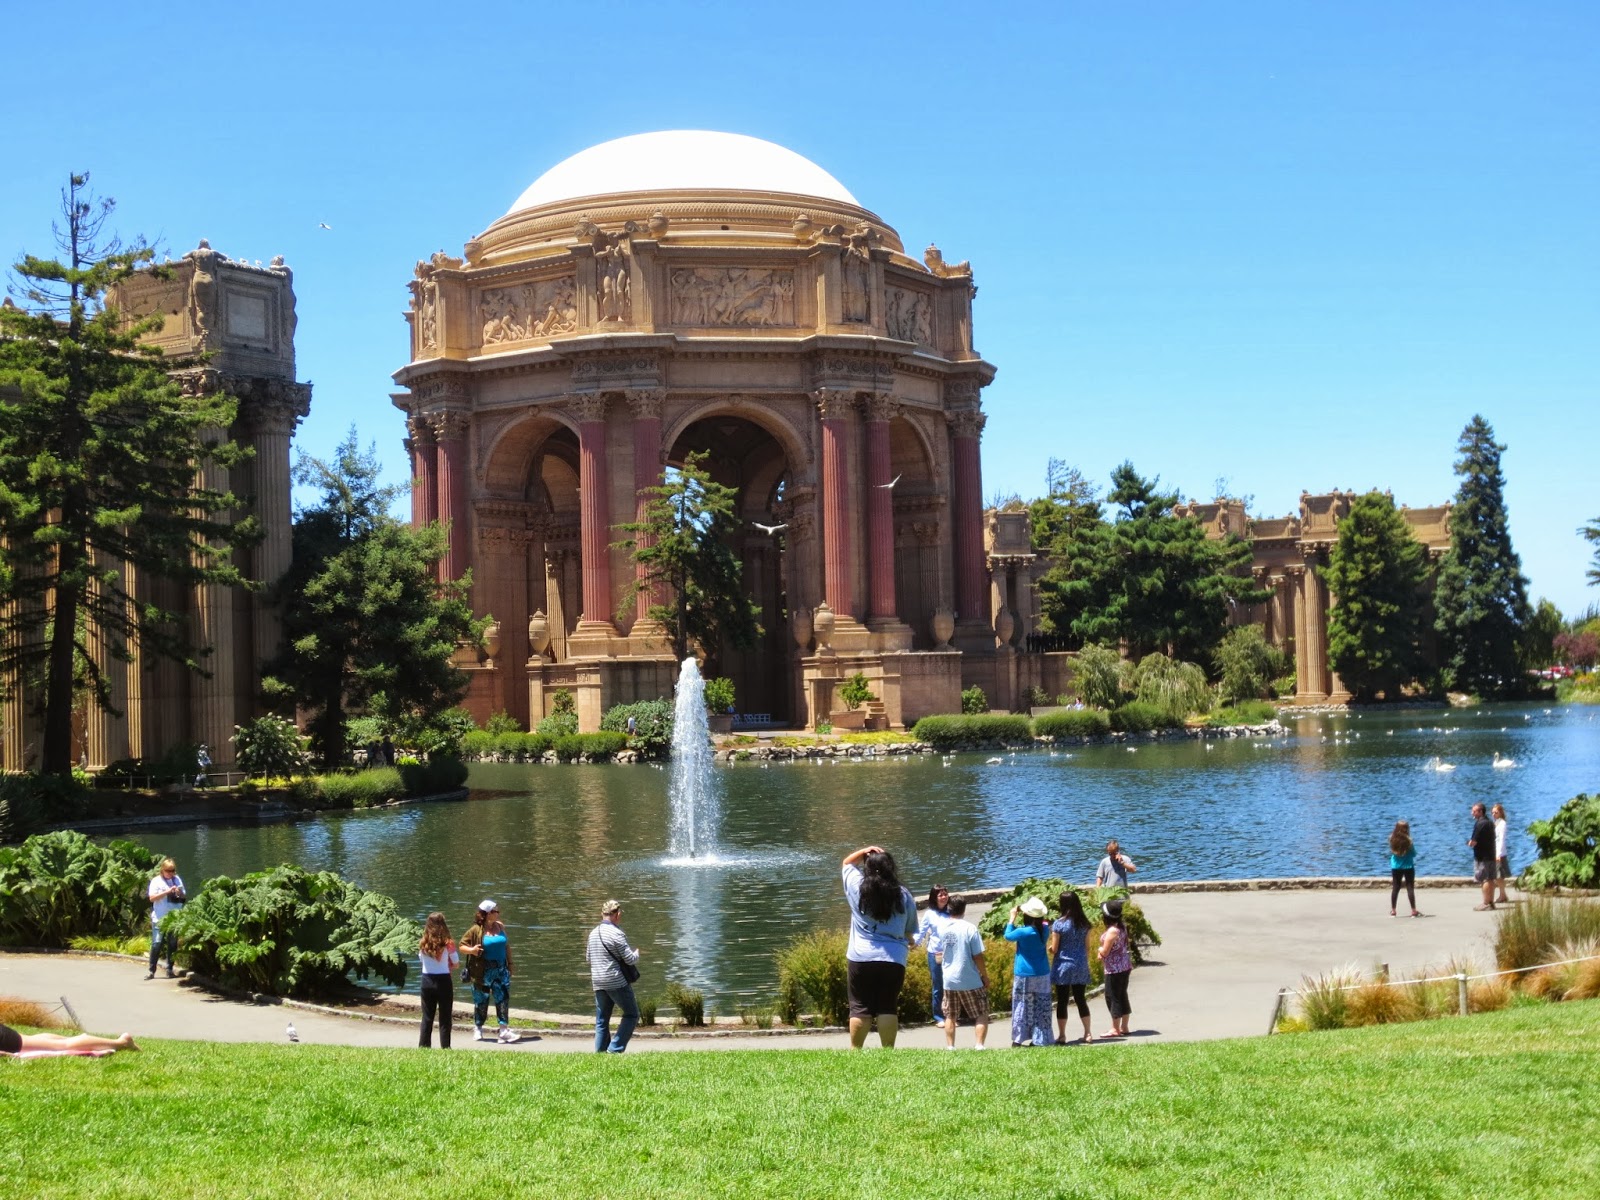 COME TO VISIT SAN FRANCISCO CA: THE MOST VISITED PLACES